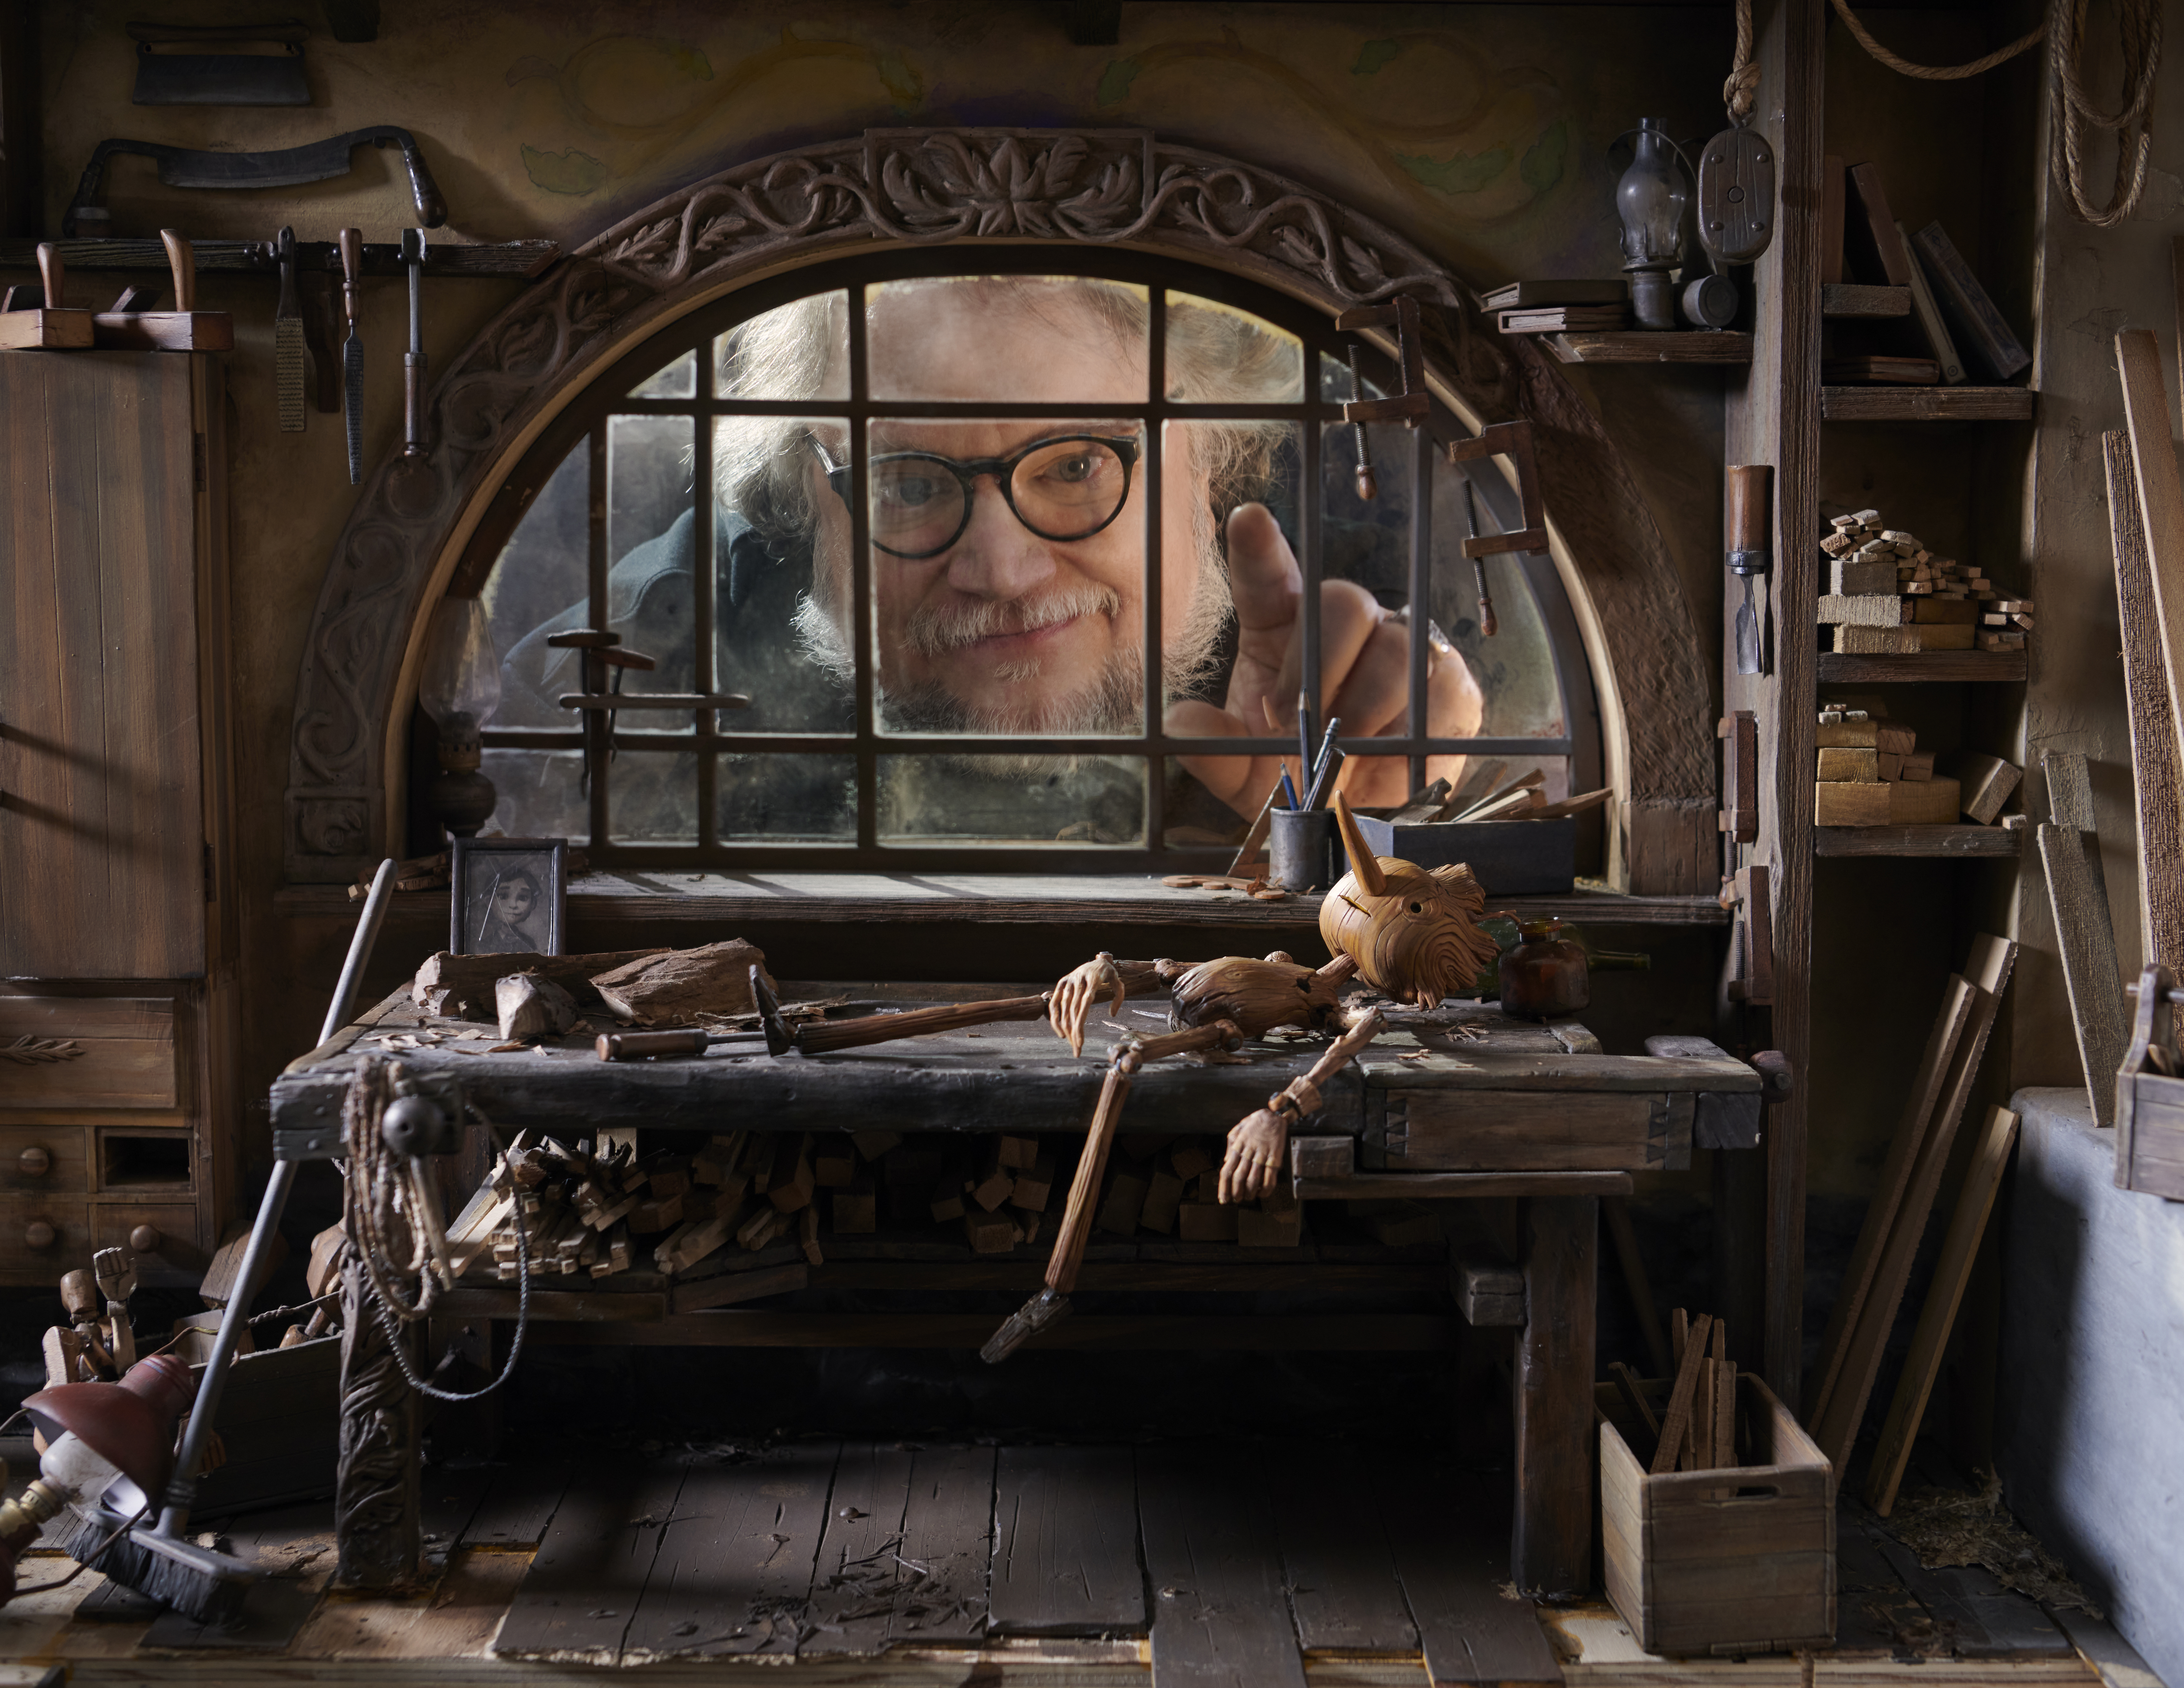 In this image provided by Netflix, Guillermo del Toro on the set of "Guillermo del Toro's Pinocchio" (“Pinocchio by Guillermo del Toro”).  (Netflix via AP)